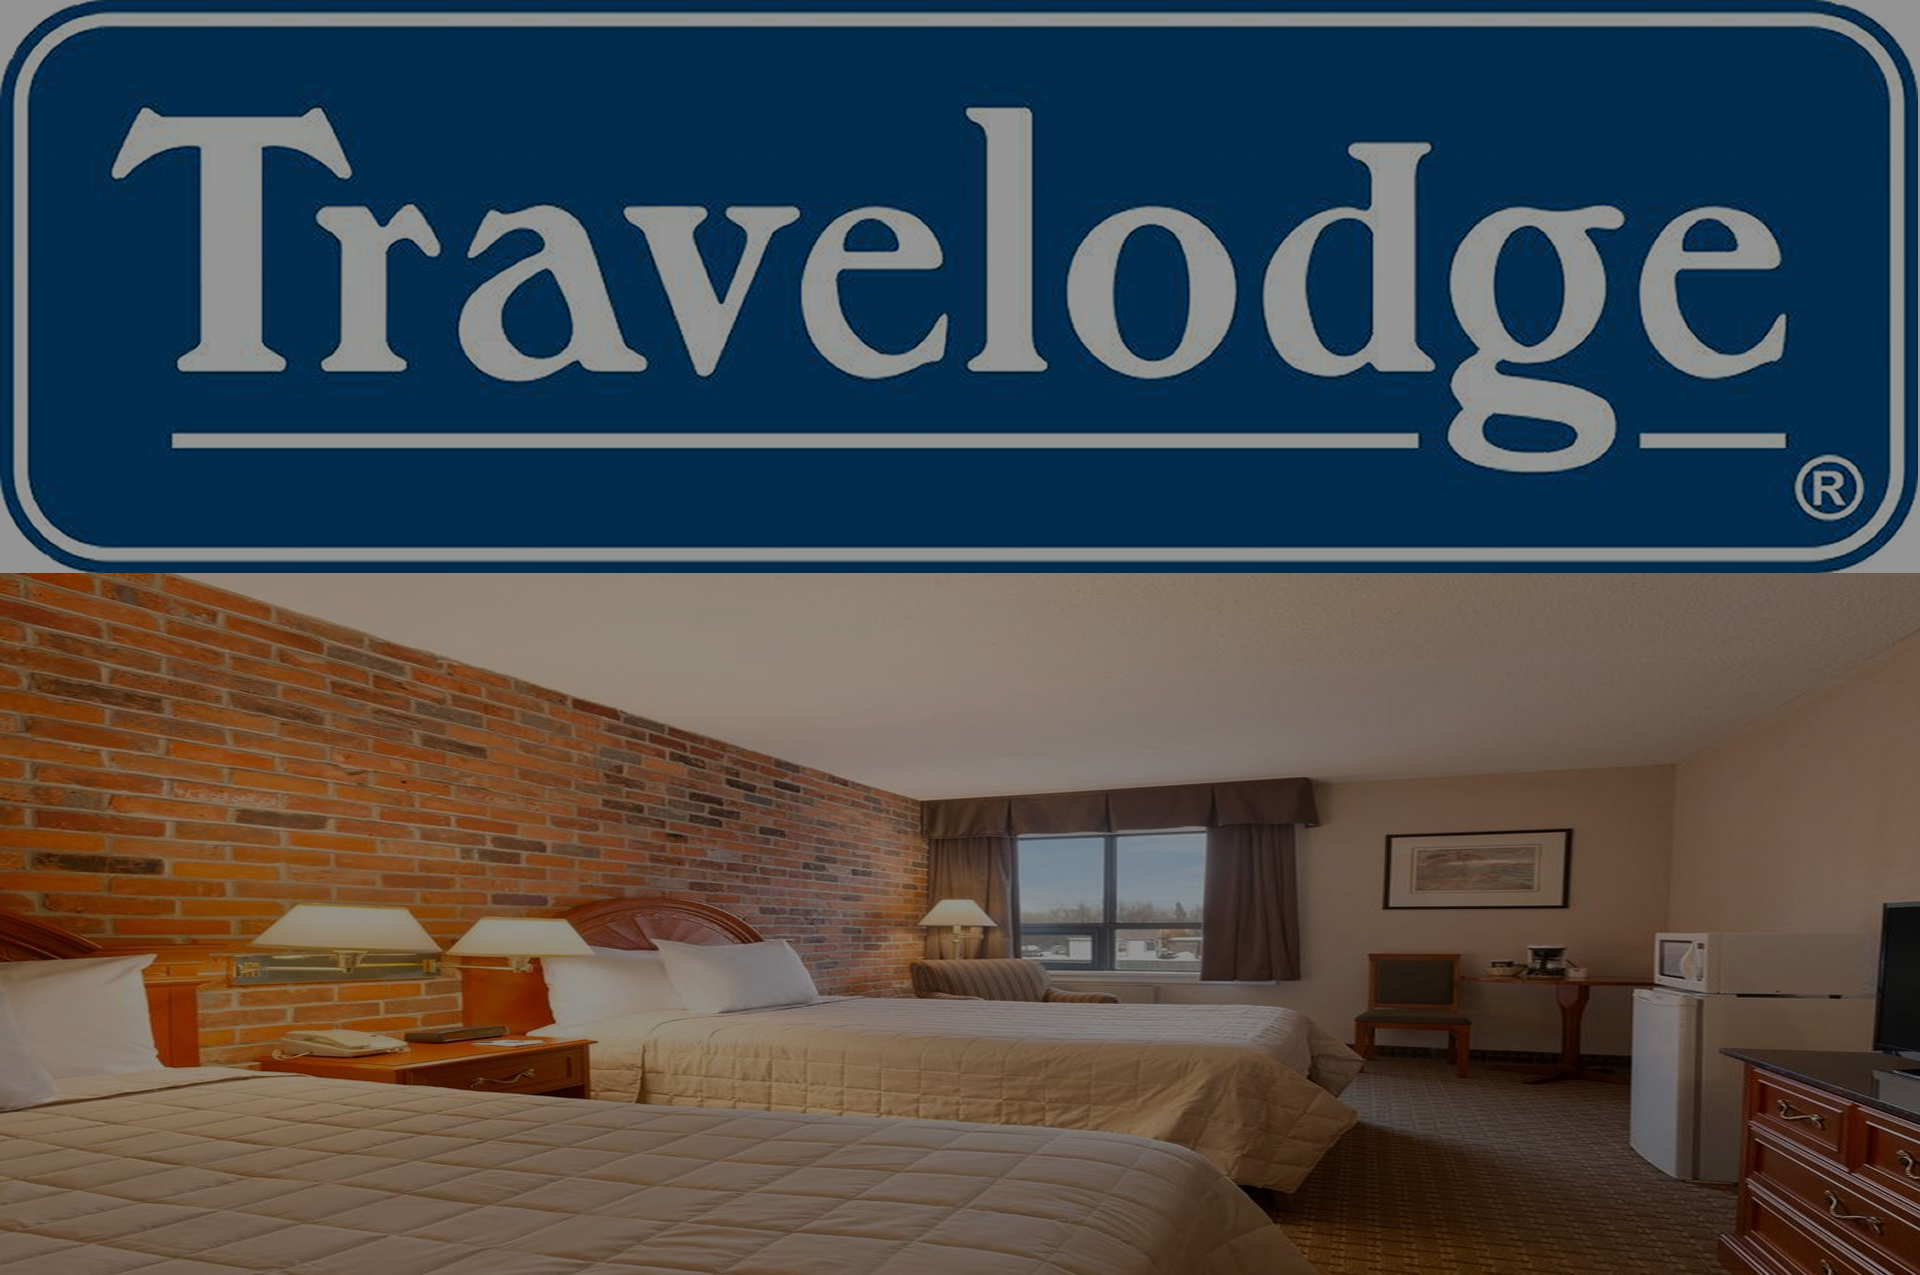 Travelodge Hotel In New Brunswick For Sale